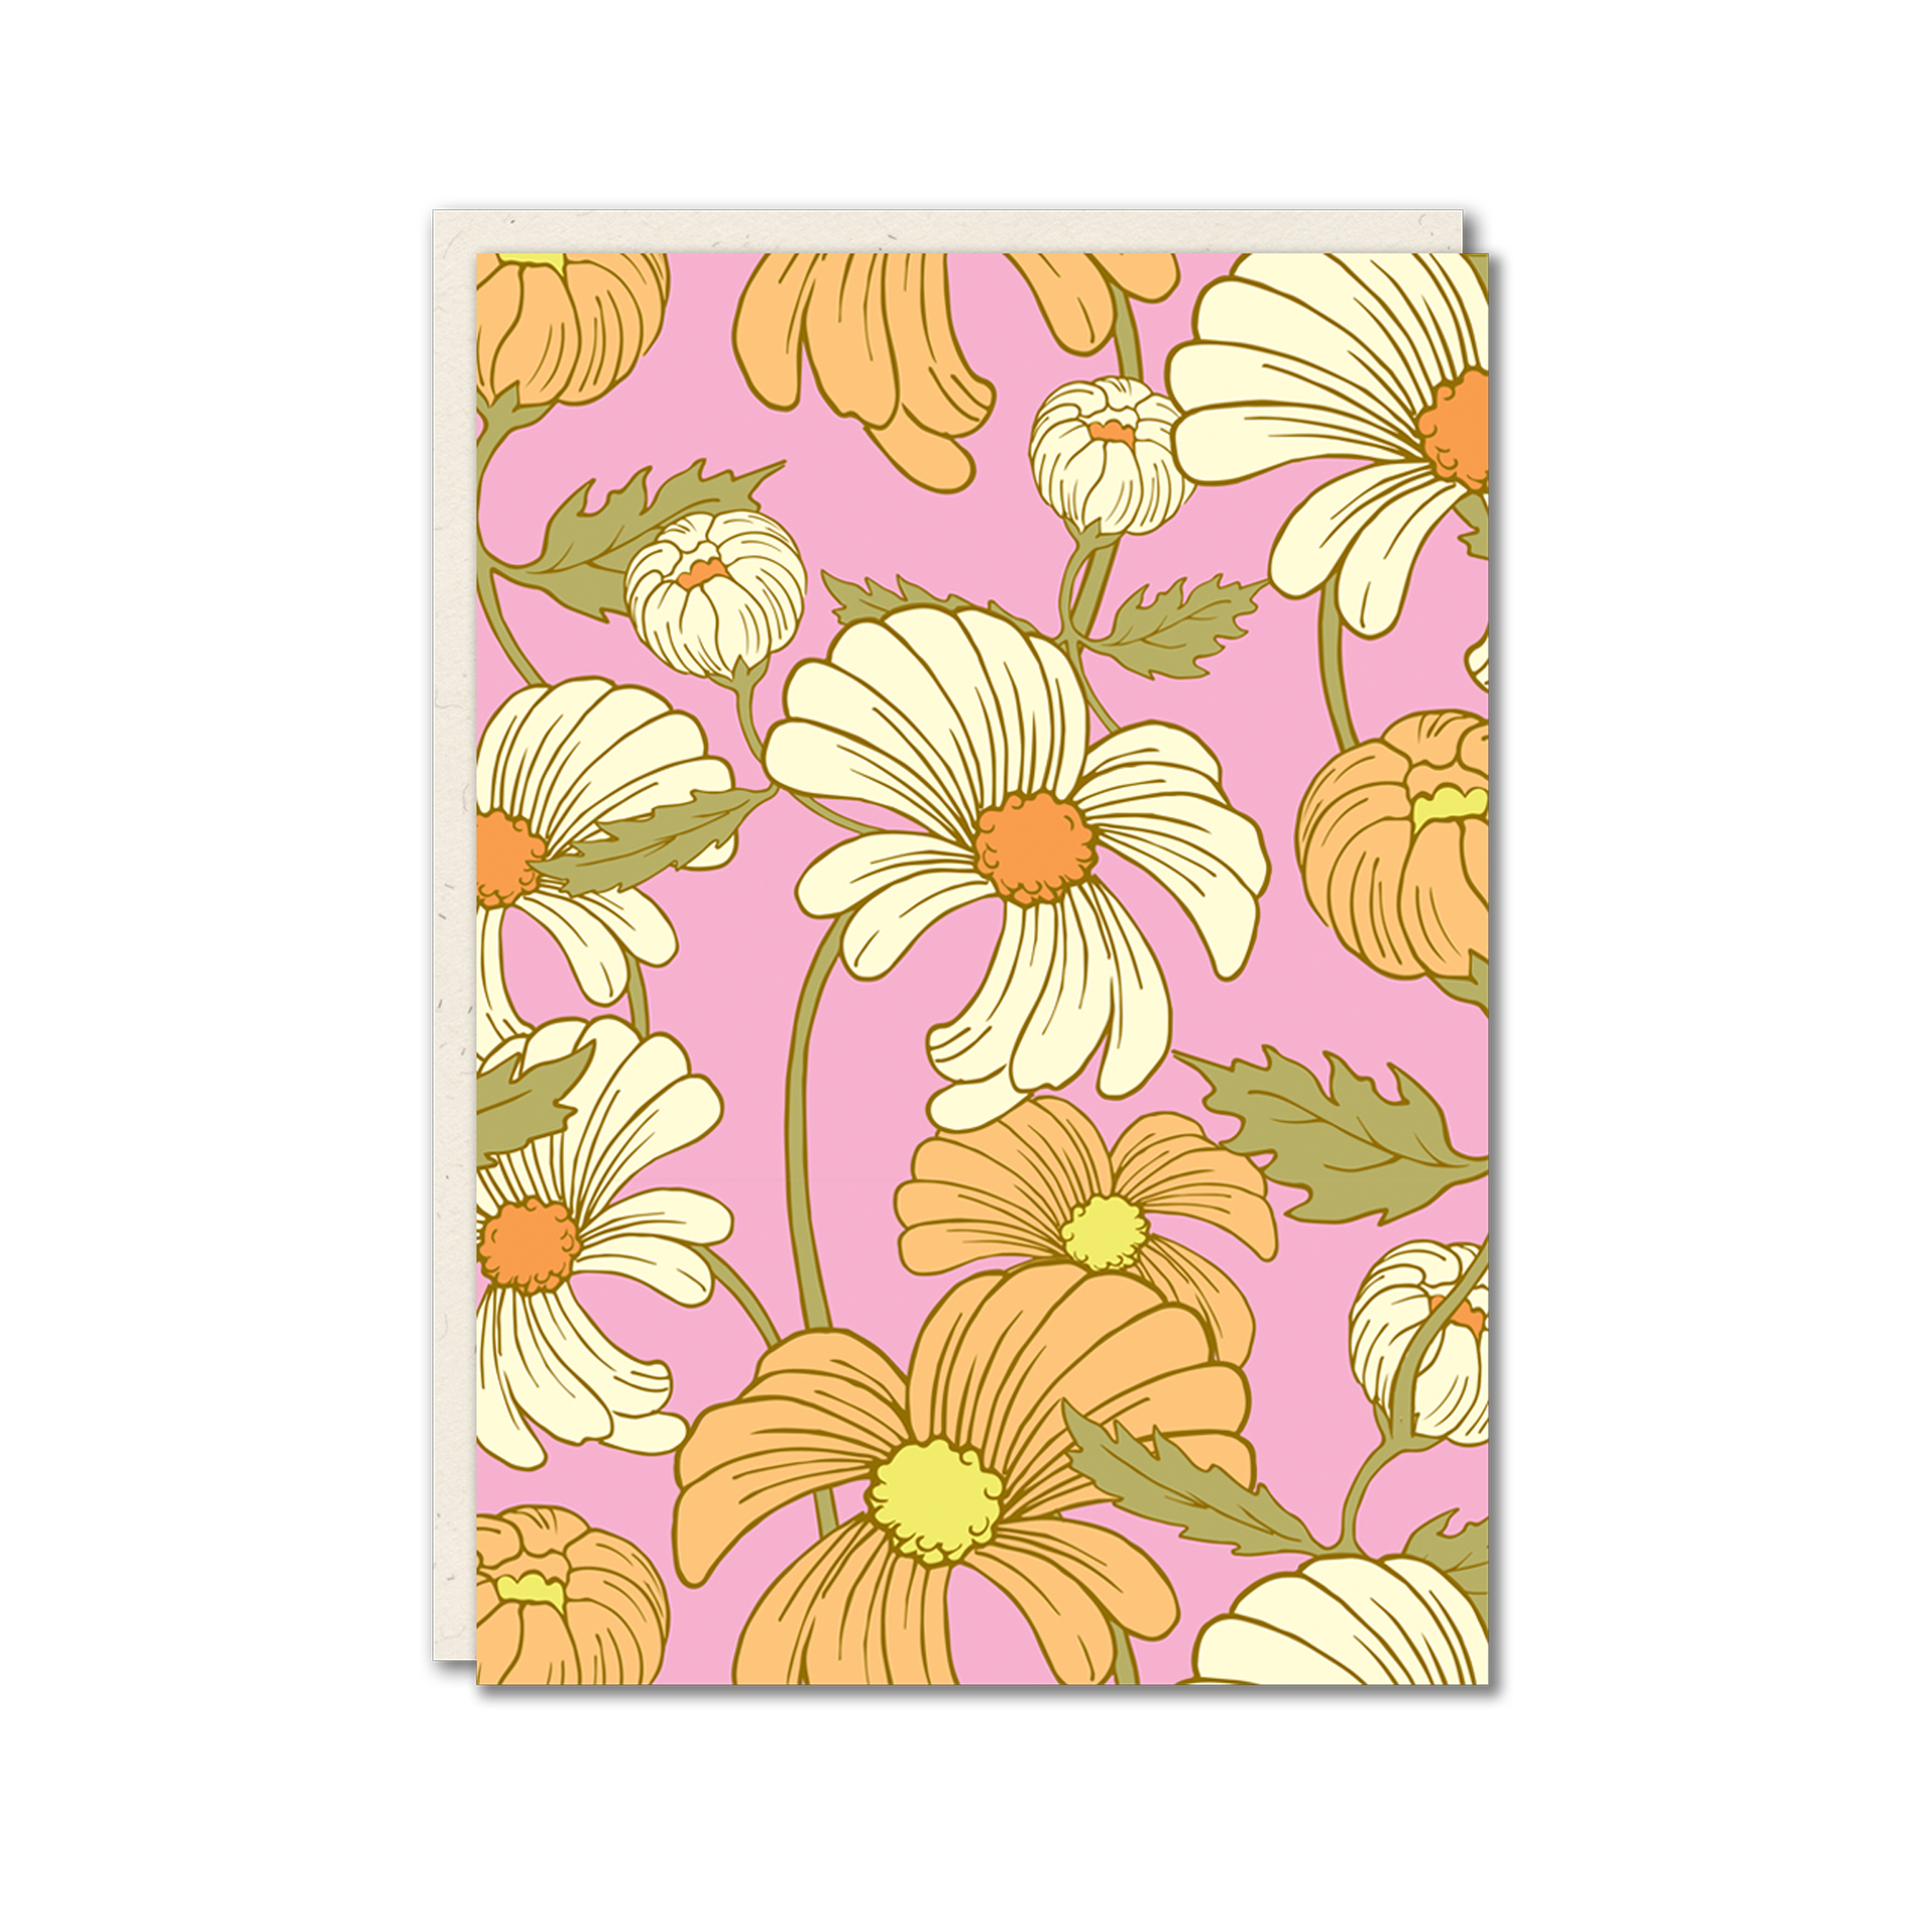 Daisy patterned floral greeting card